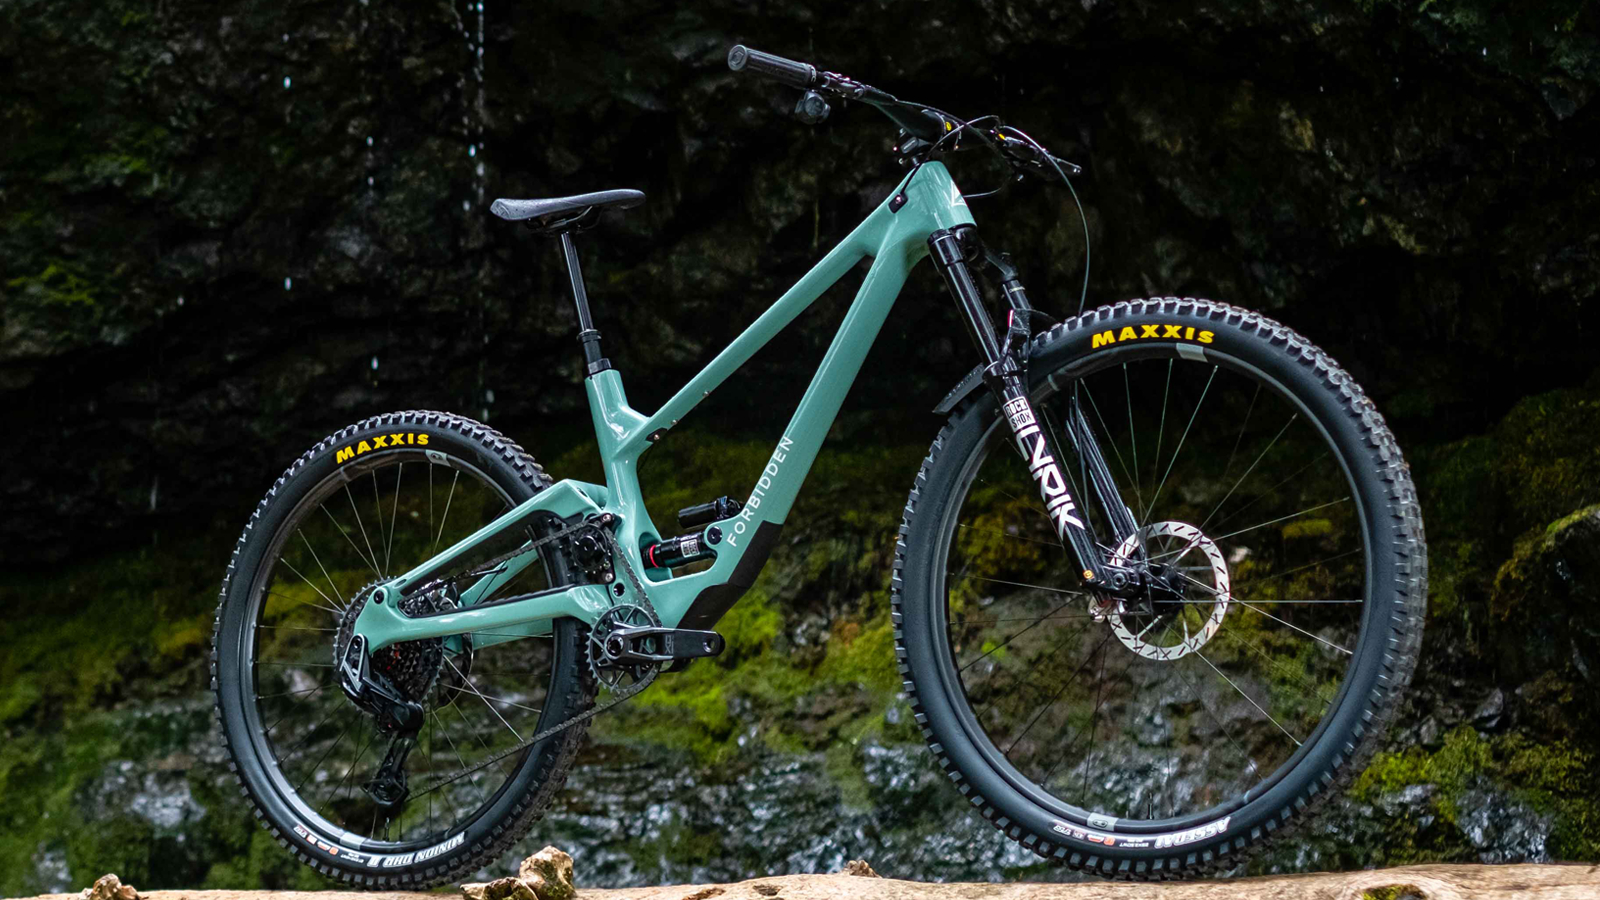 Forbidden updates its radical high-pivot trail bike with the Druid